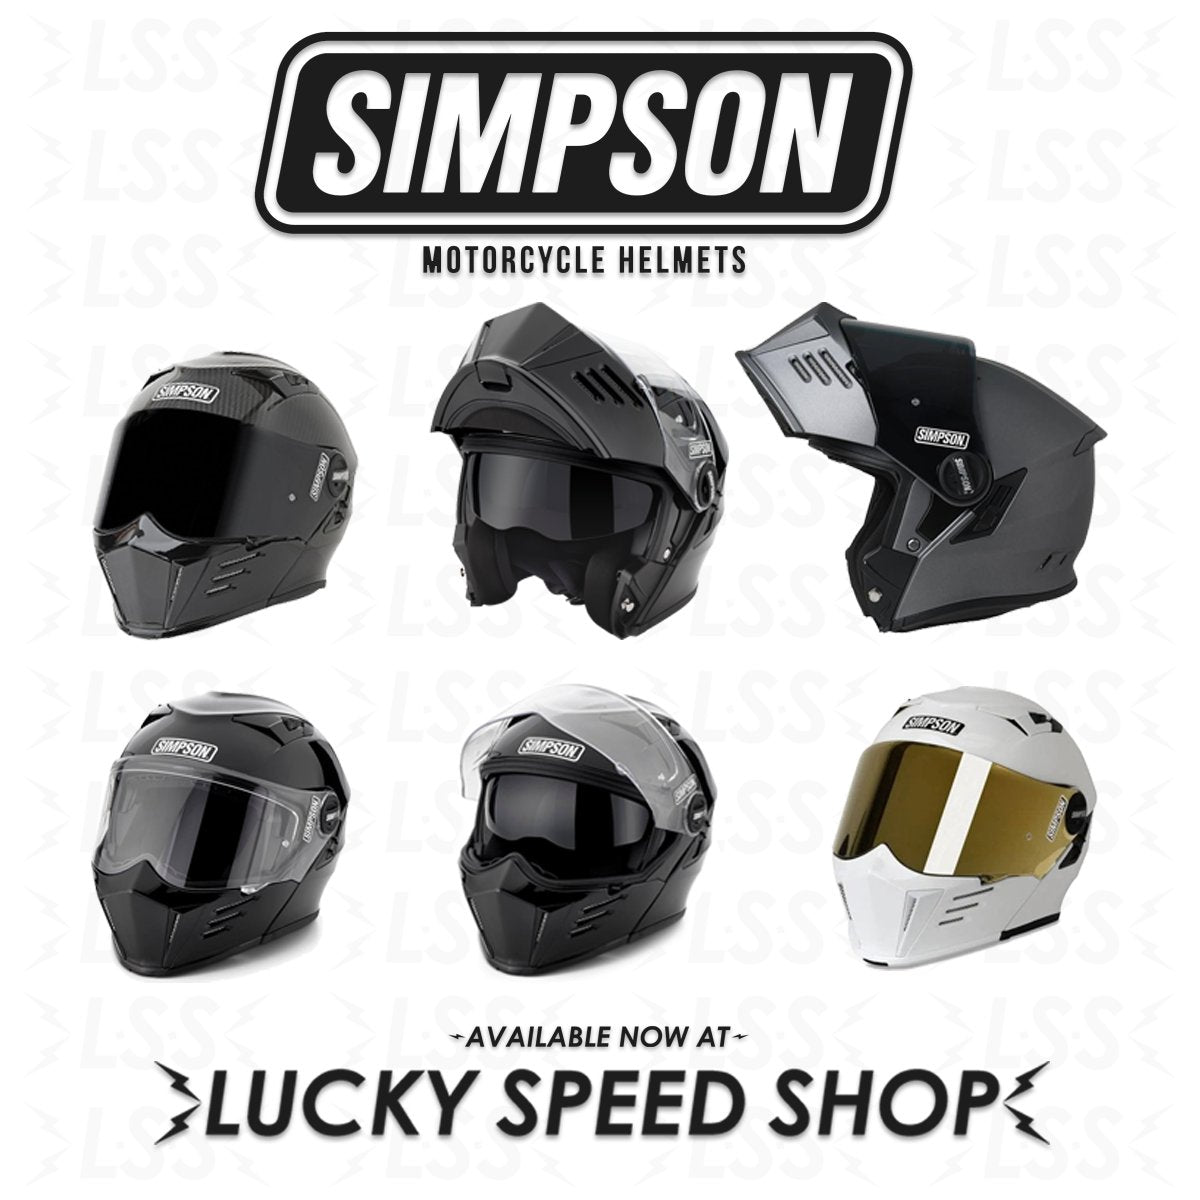 Simpson Racing Products - Lucky Speed Shop